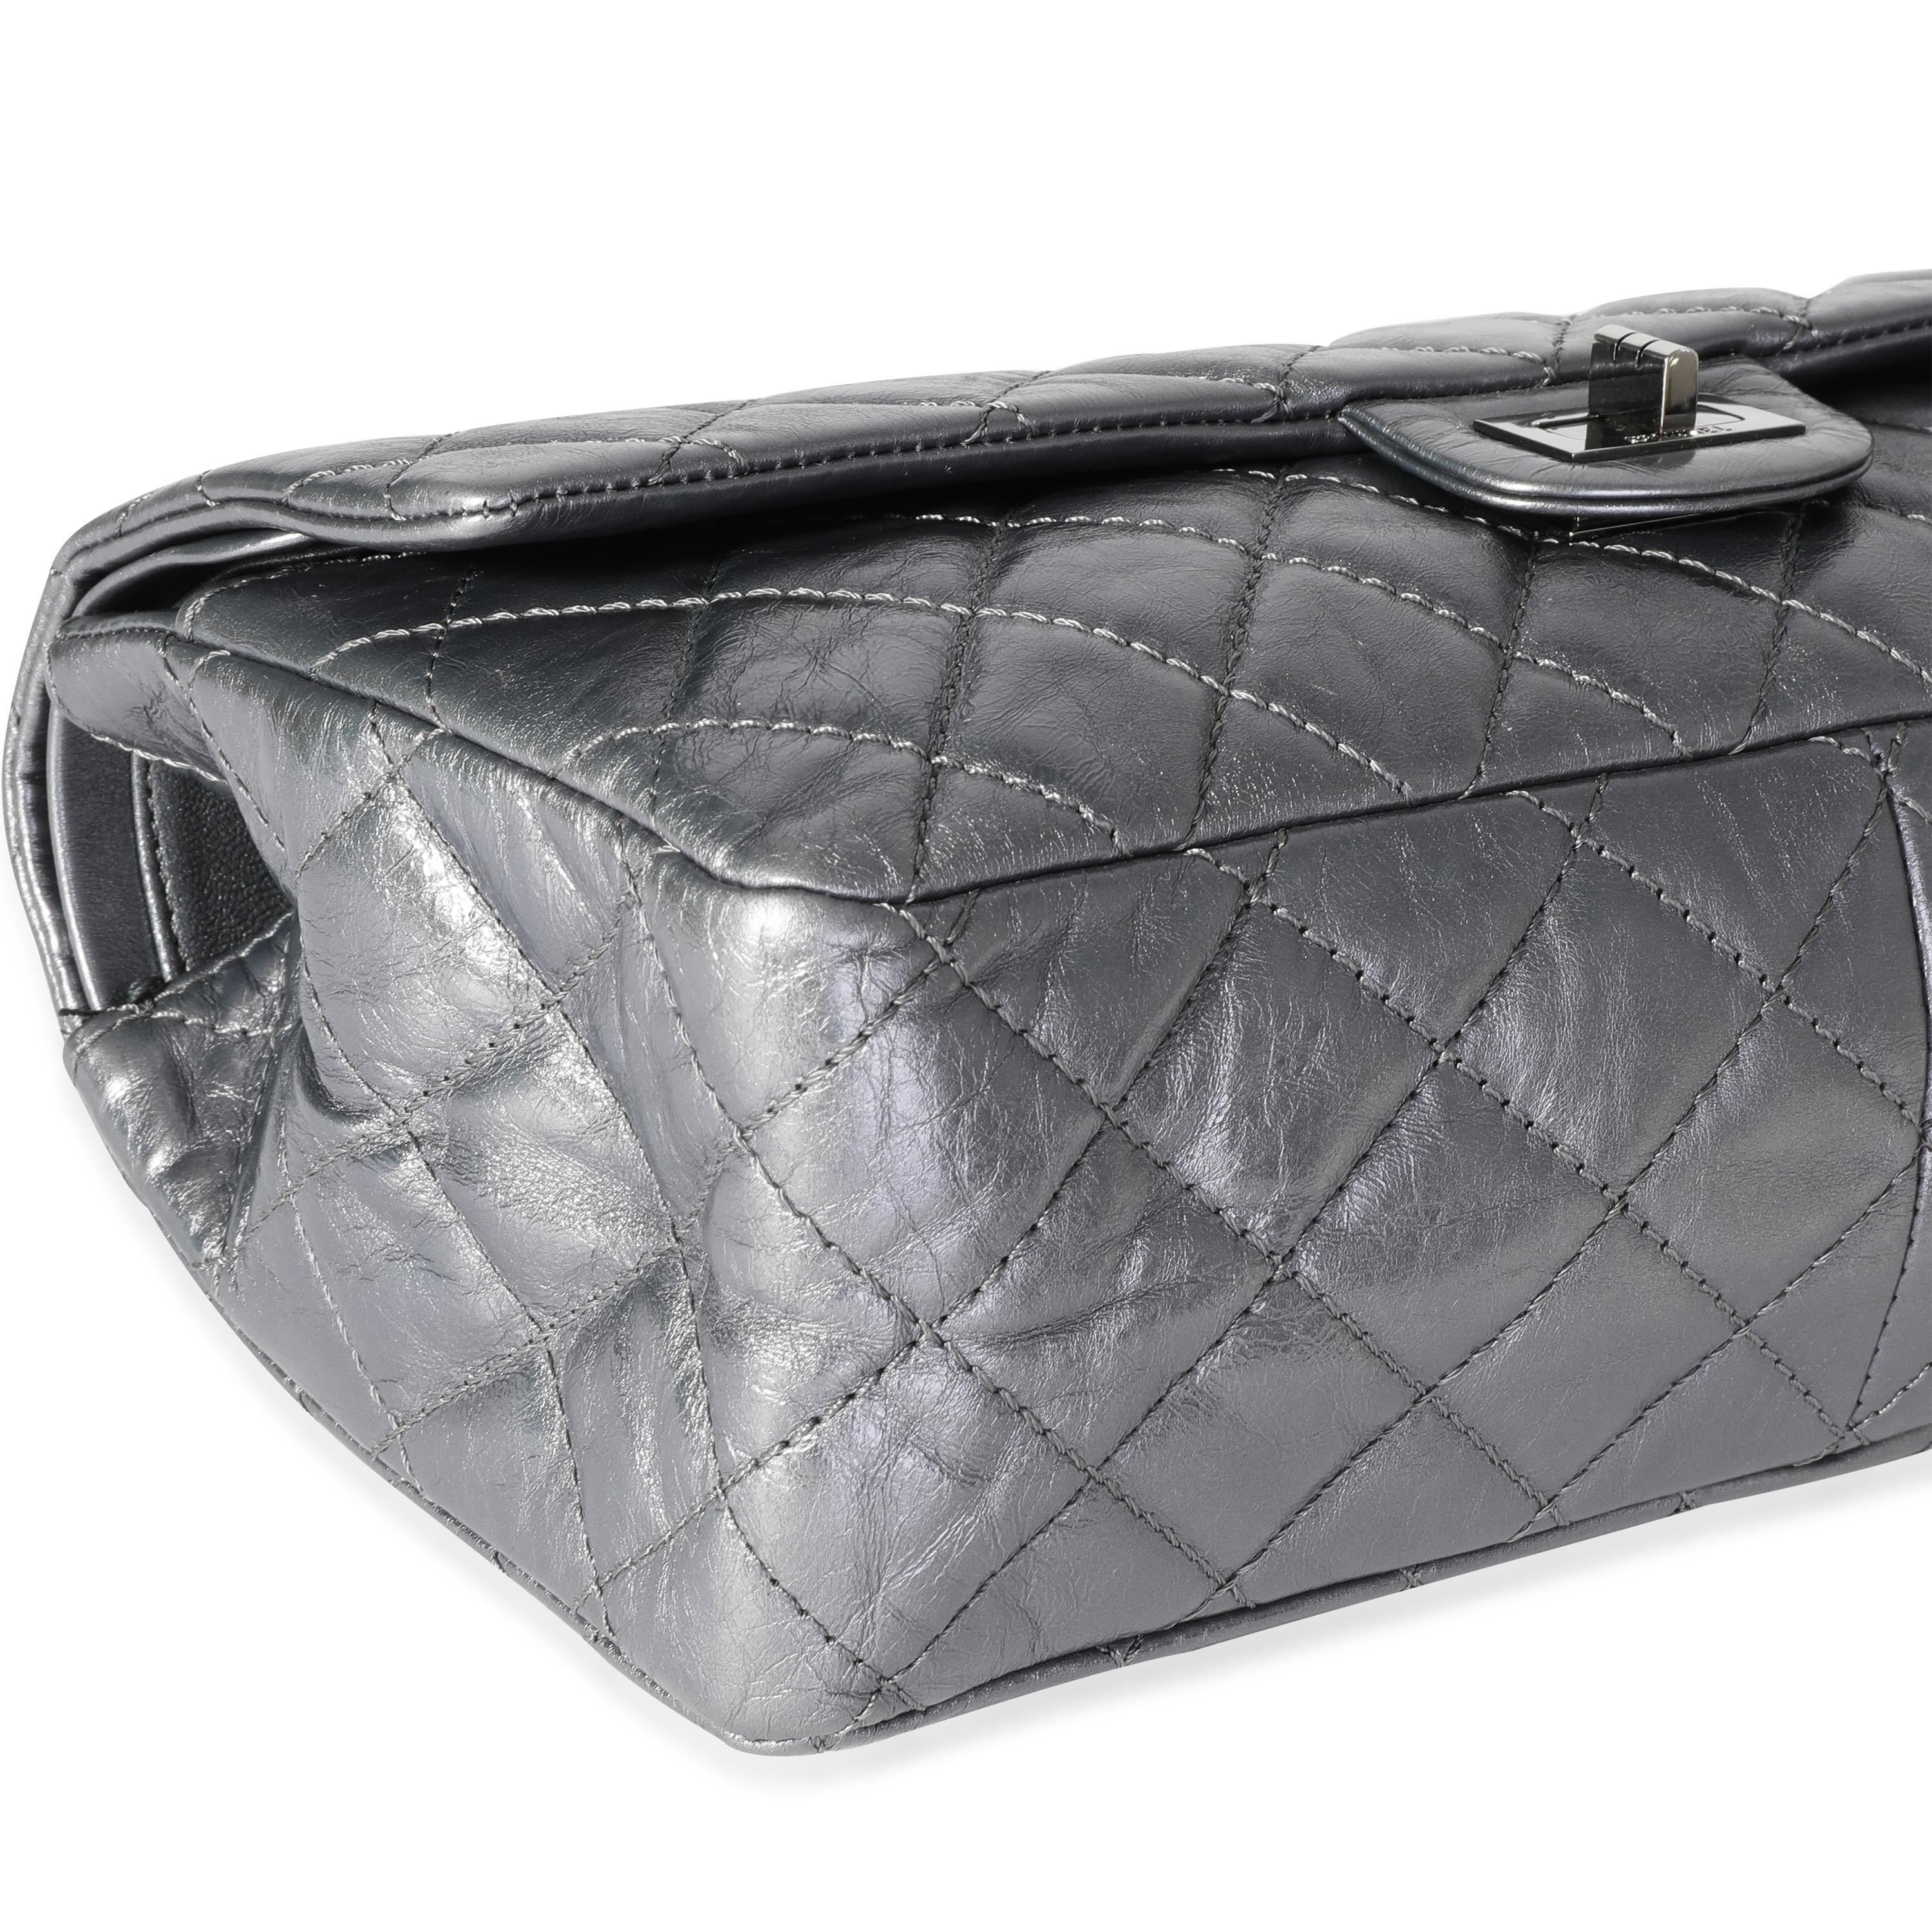 Chanel Silver Metallic Quilted Aged Calfskin Reissue 2.55 226 2